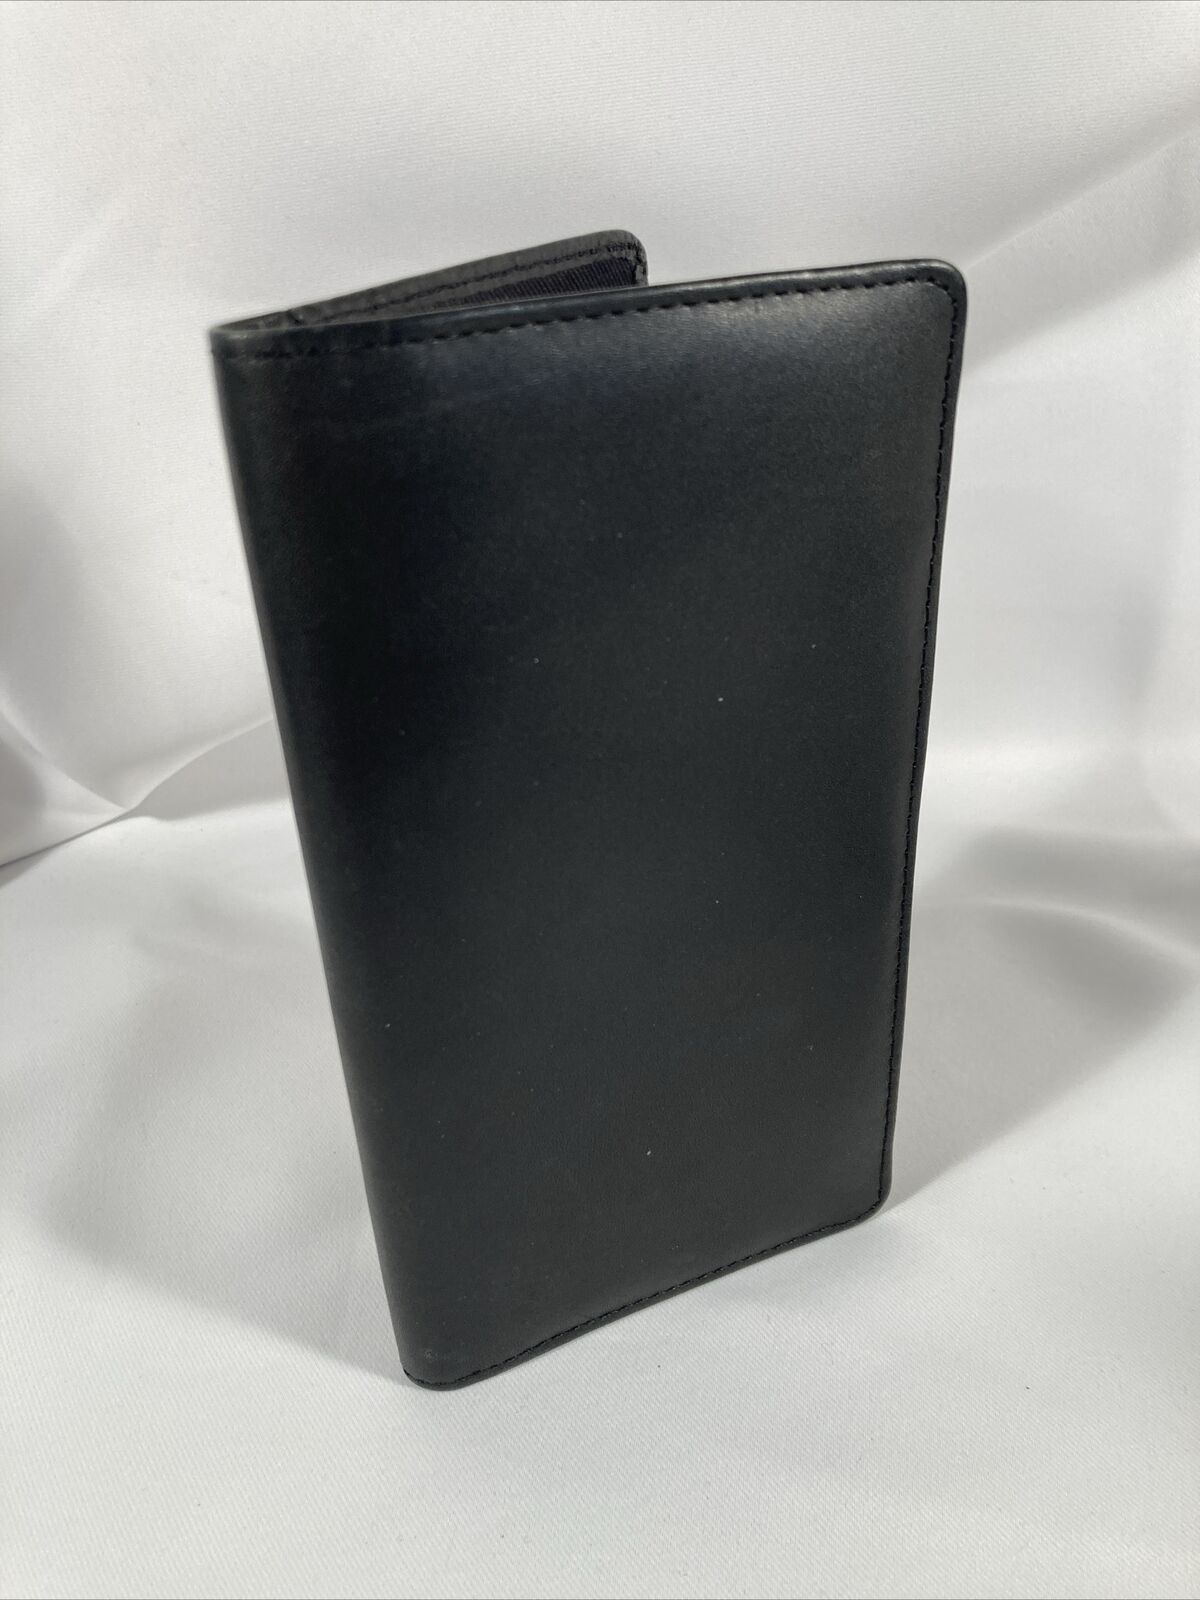 Wilson’s Leather Black Leather Checkbook Cover W/ Carbon Plastic Insert